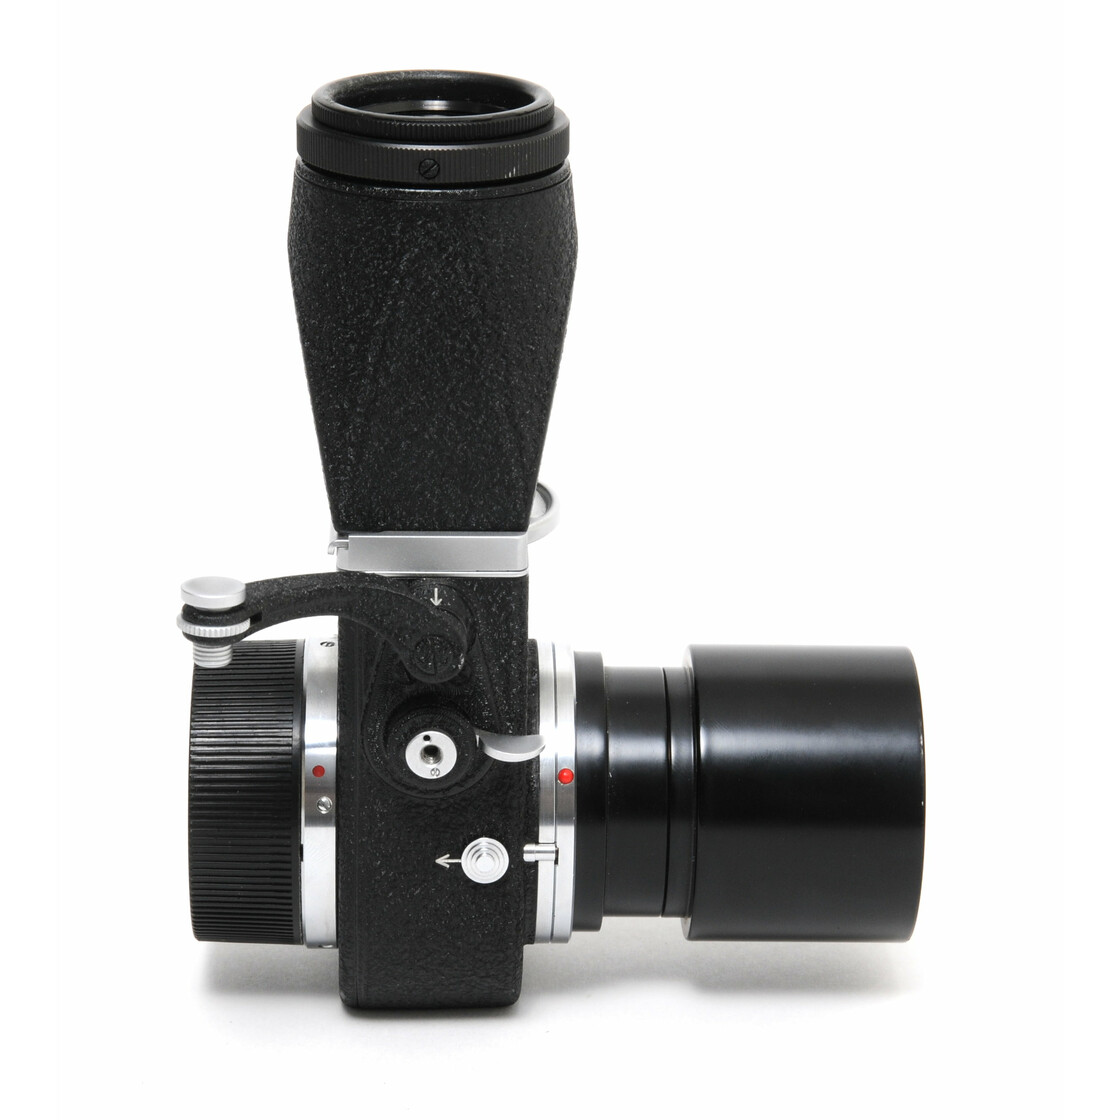 Leica Leitz Special Visoflex III with vertical Magnifier and lupe